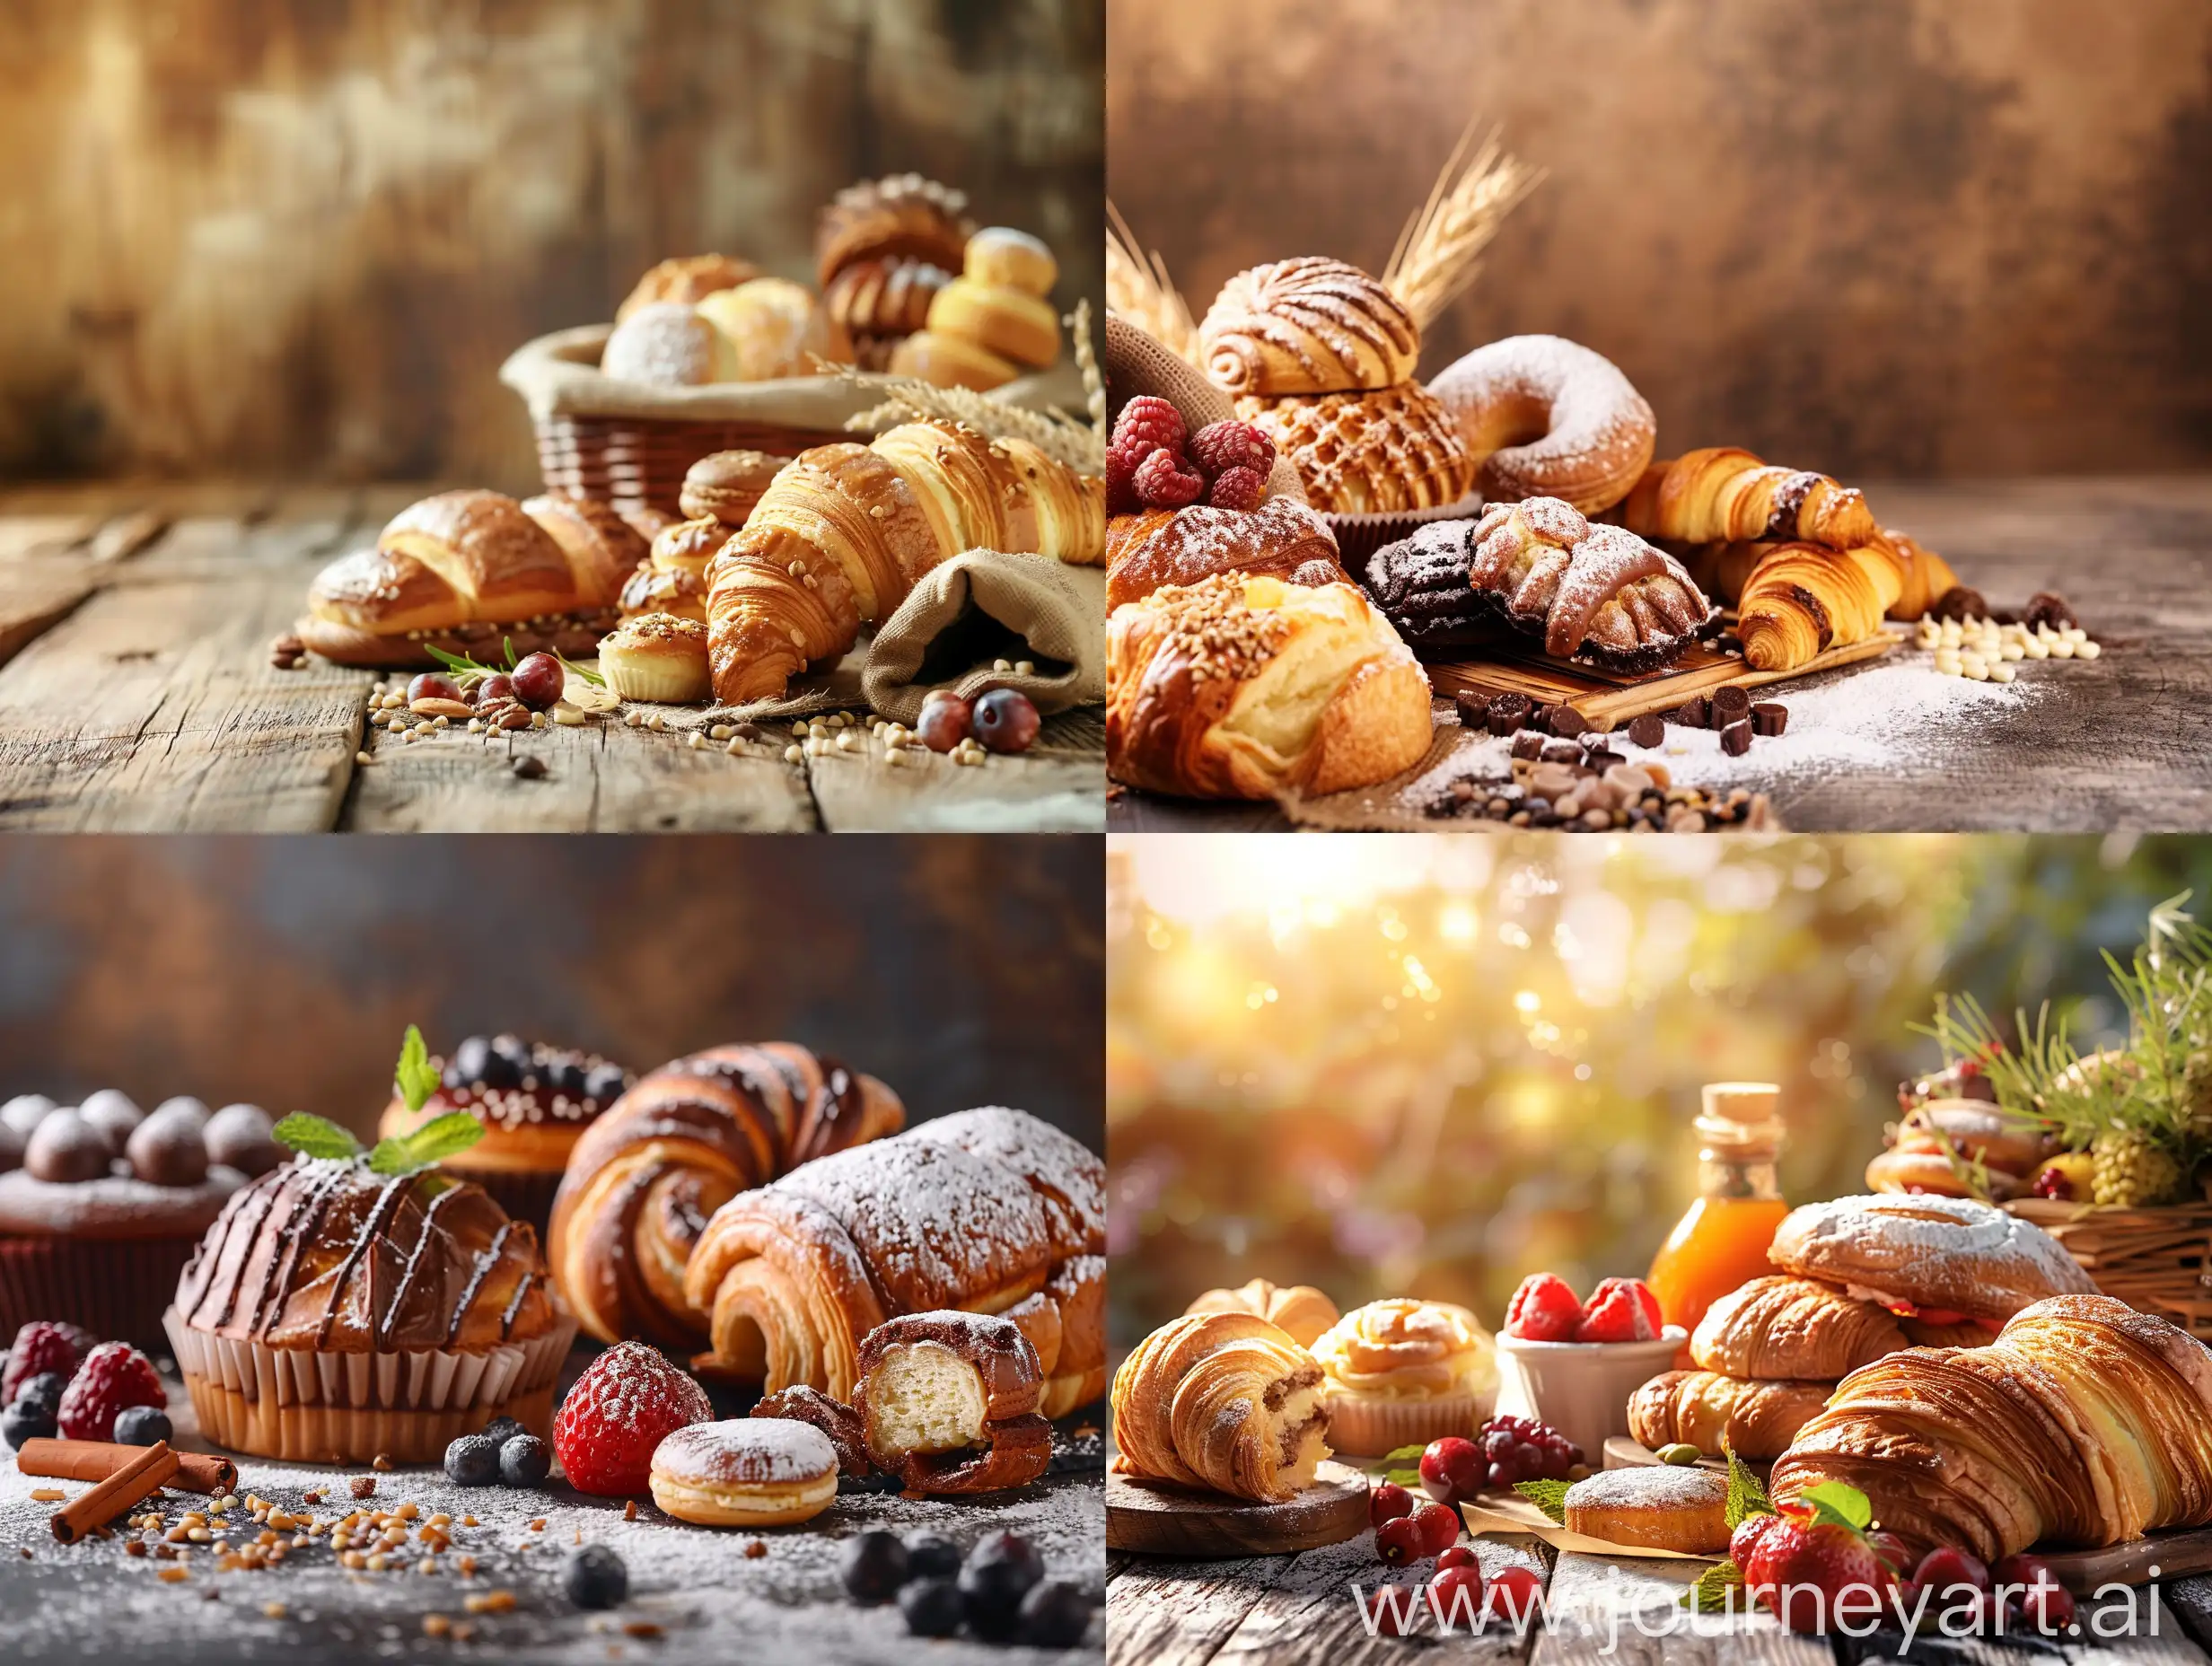 Irresistible-Bakery-Franchise-Presentation-with-Delectable-Pastries